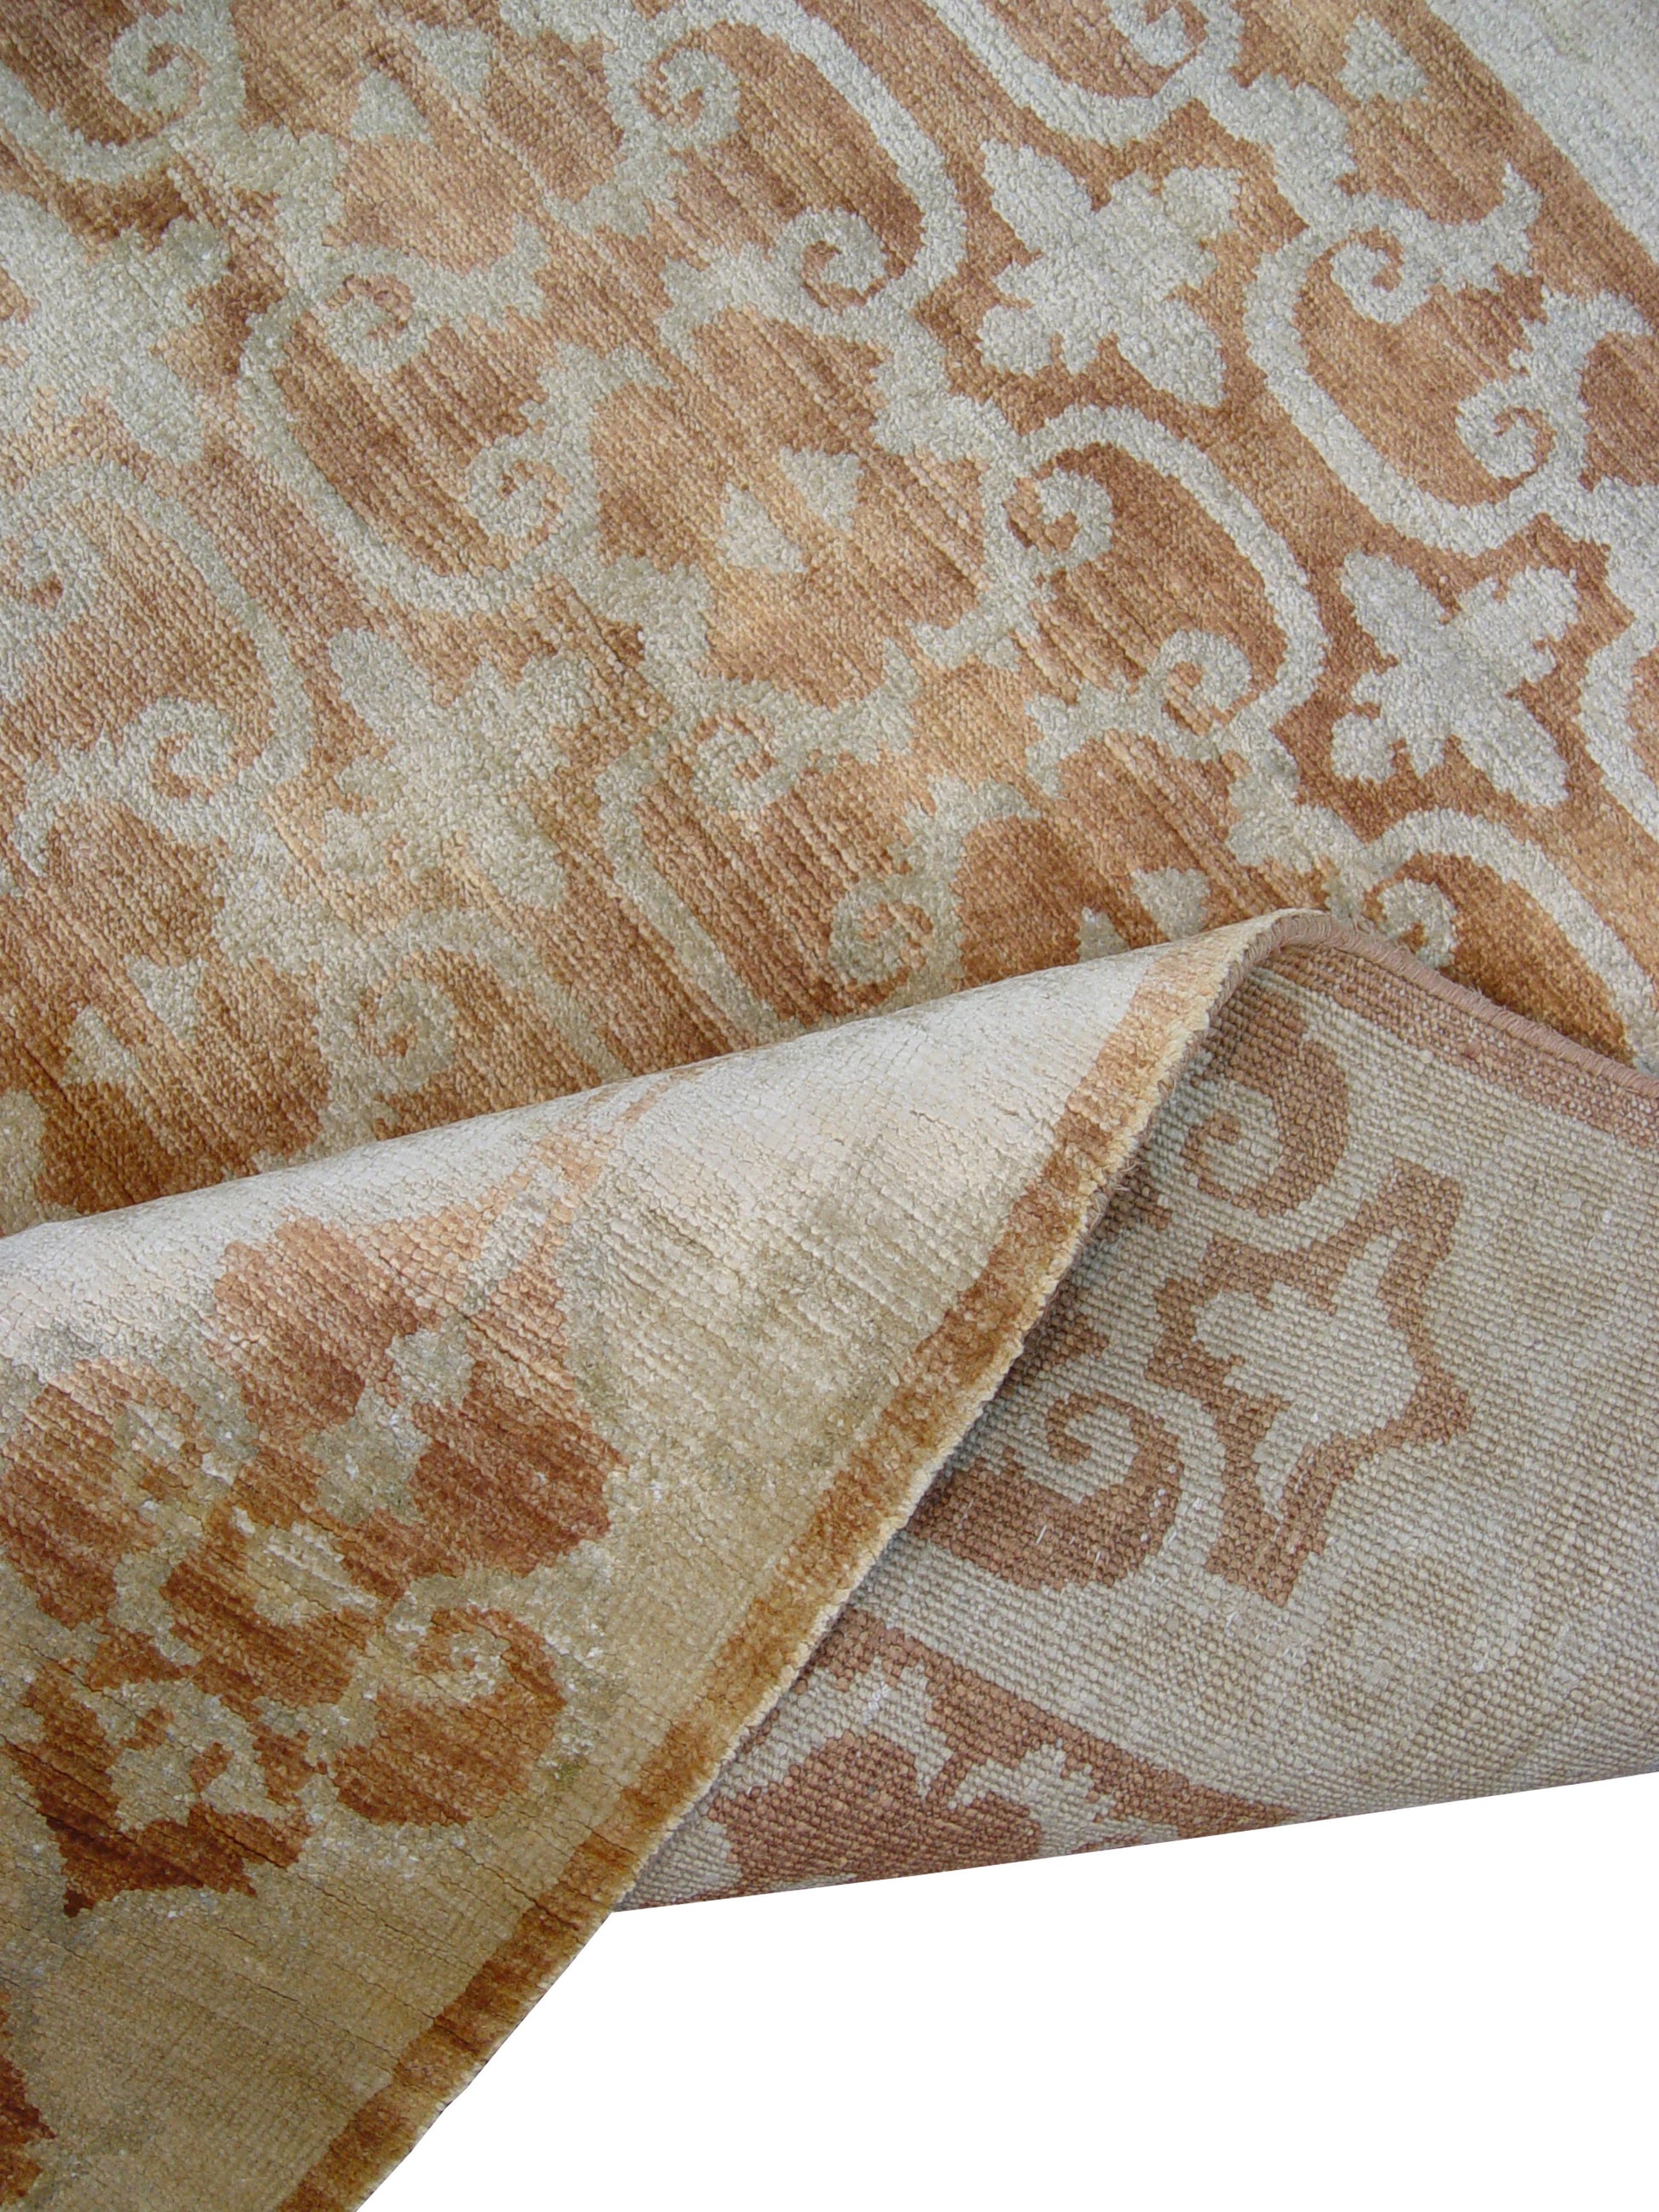 Get trendy with Ivory and Rust Pure Silk Transitional Handknotted Area Rug 6x8.10ft 182x269Cms - Transitional Rugs available at Jaipur Oriental Rugs. Grab yours for $3815.00 today!